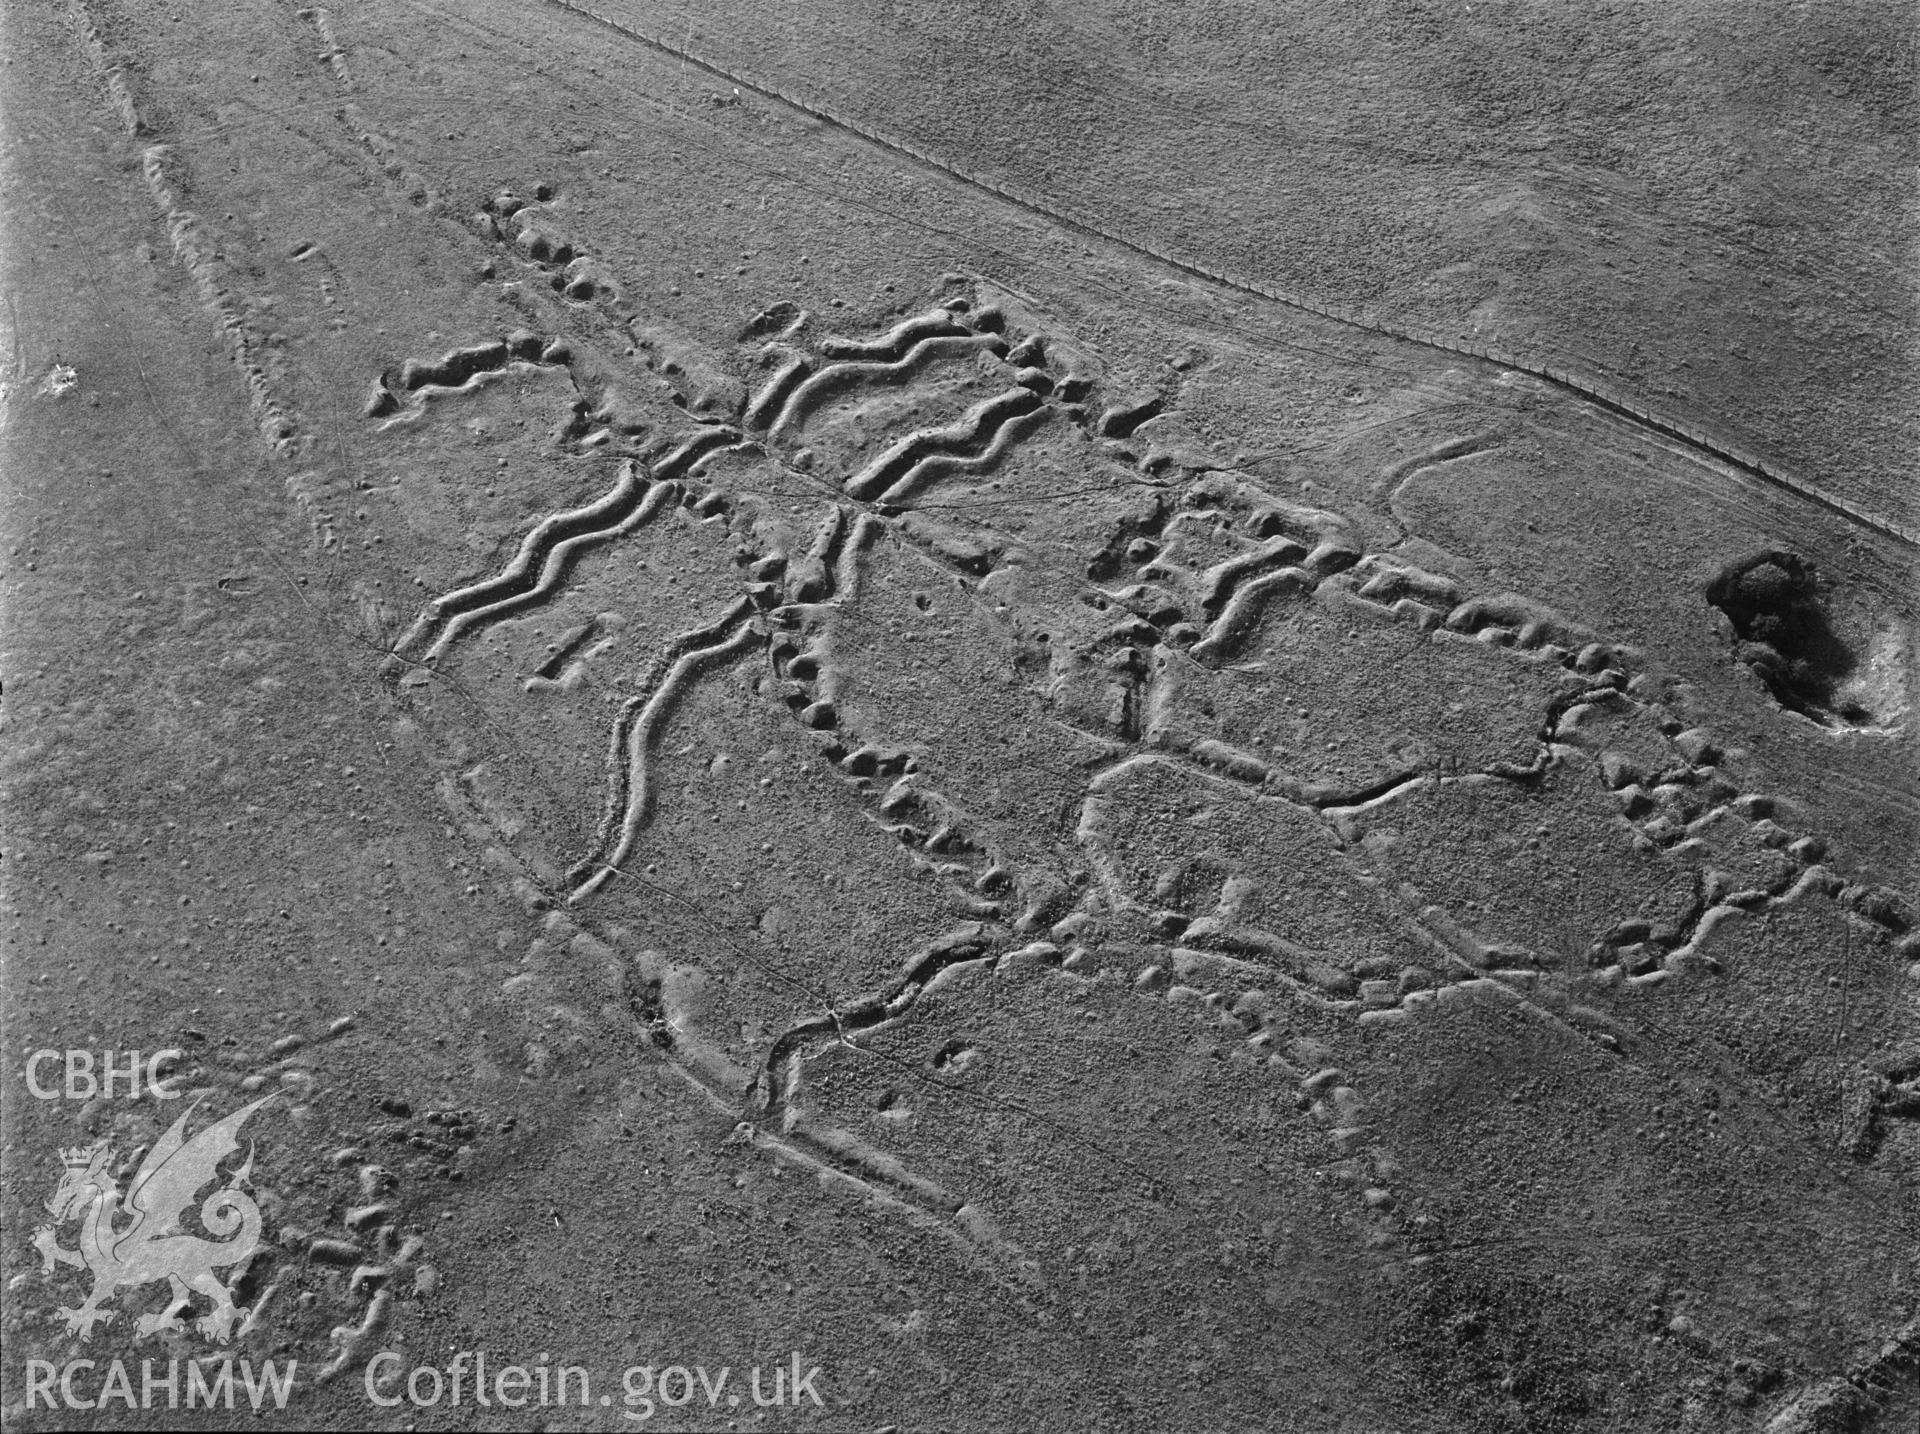 RCAHMW black and white oblique aerial photograph of Penally WW1 Practice Trench system. Taken by Toby Driver on 02/09/2002